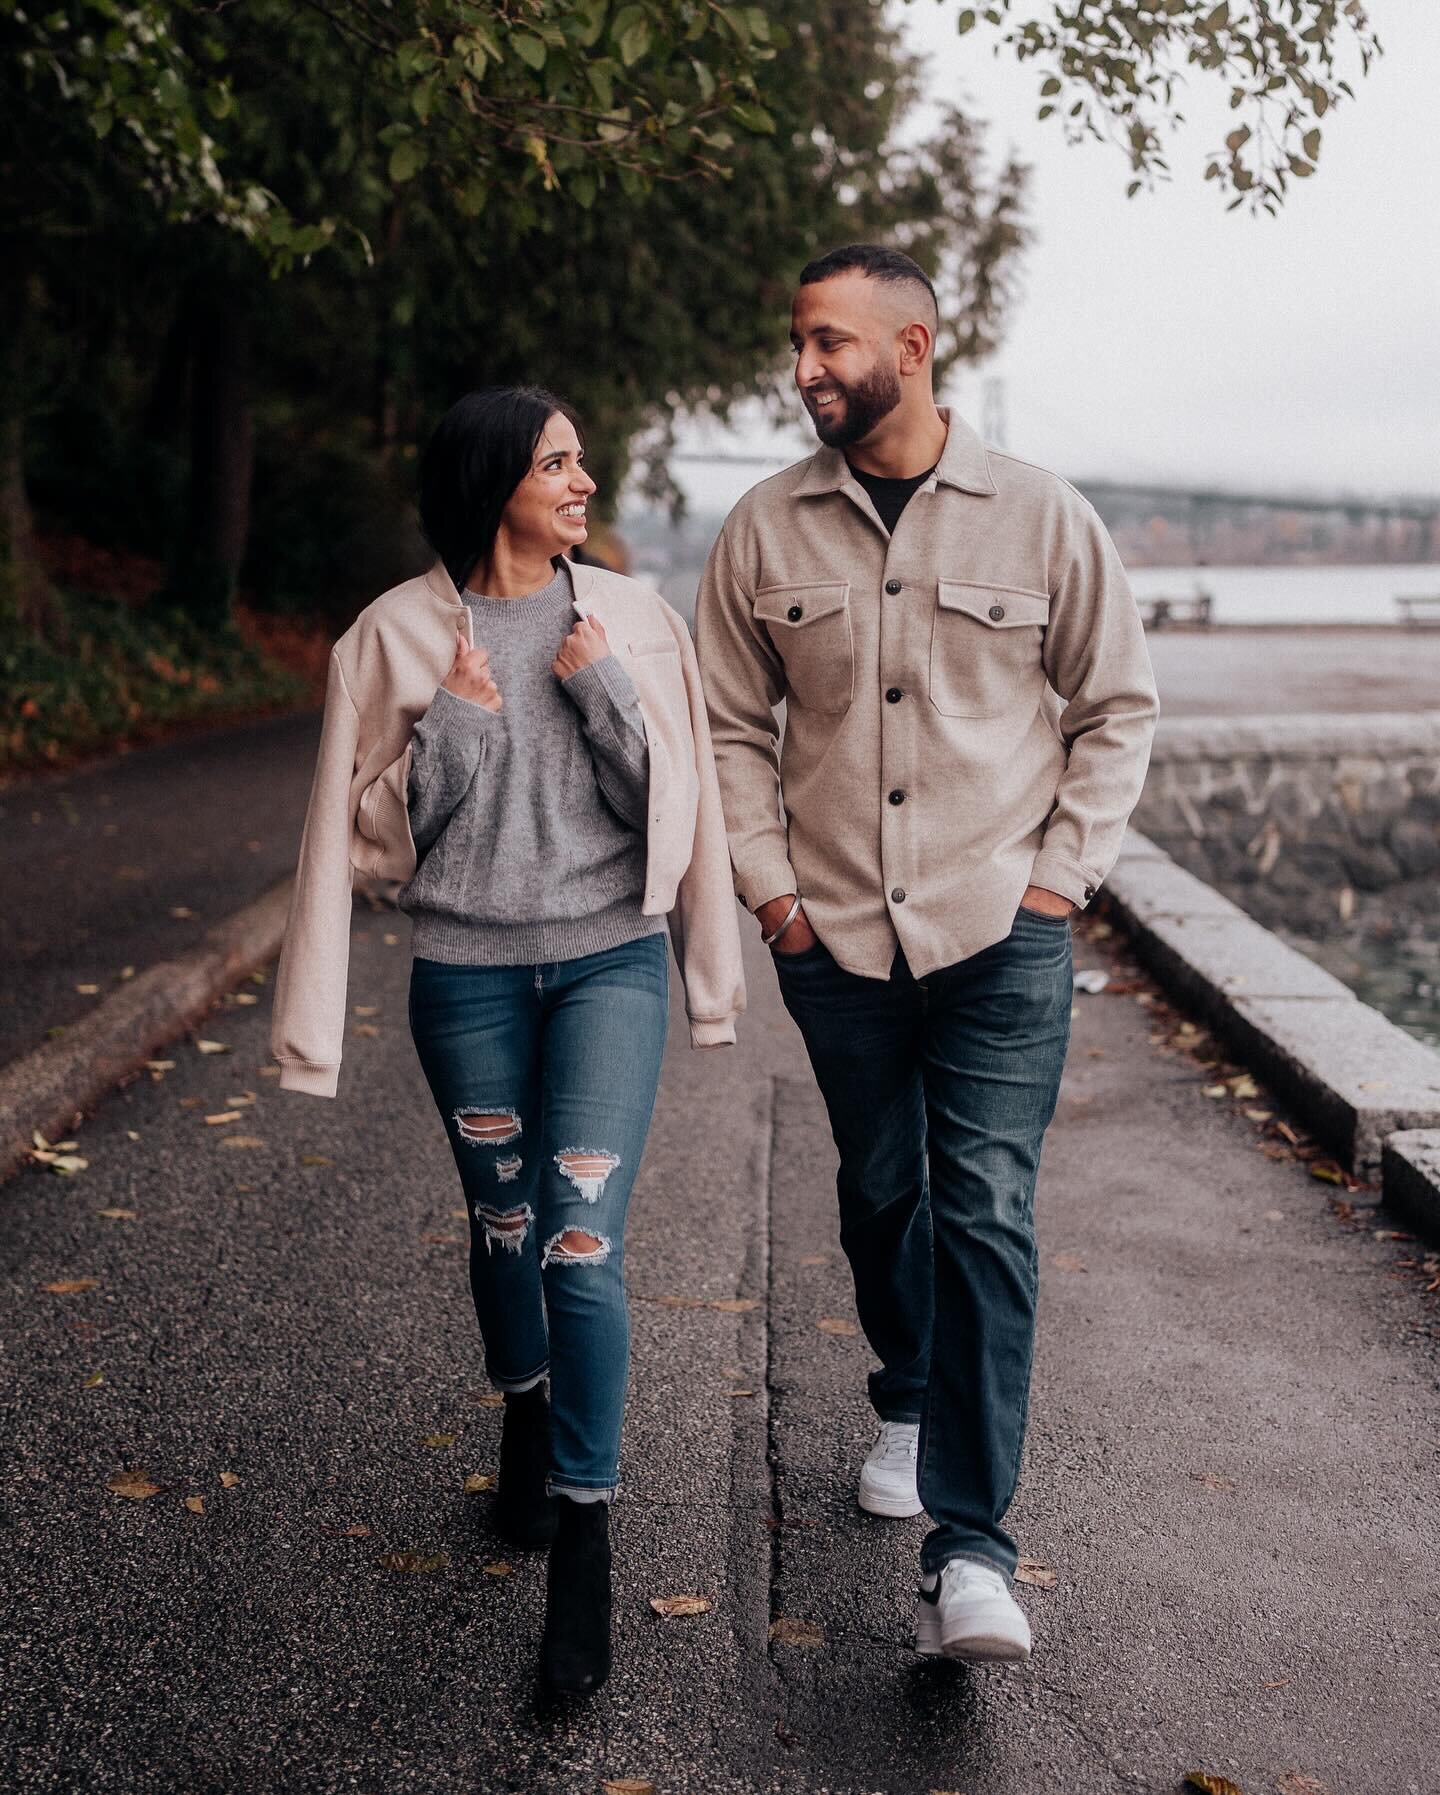 My ride or die 🥰
&bull;
&bull;
Inquire now for 2024/2025 dates at www.sahotafilms.com/contact
&bull;
&bull;
#wildlyinlove #photographer&nbsp;#photography&nbsp;#vancouverphotographer&nbsp;#couplescollective&nbsp;#pnwphotographer&nbsp;#bcweddingphotog